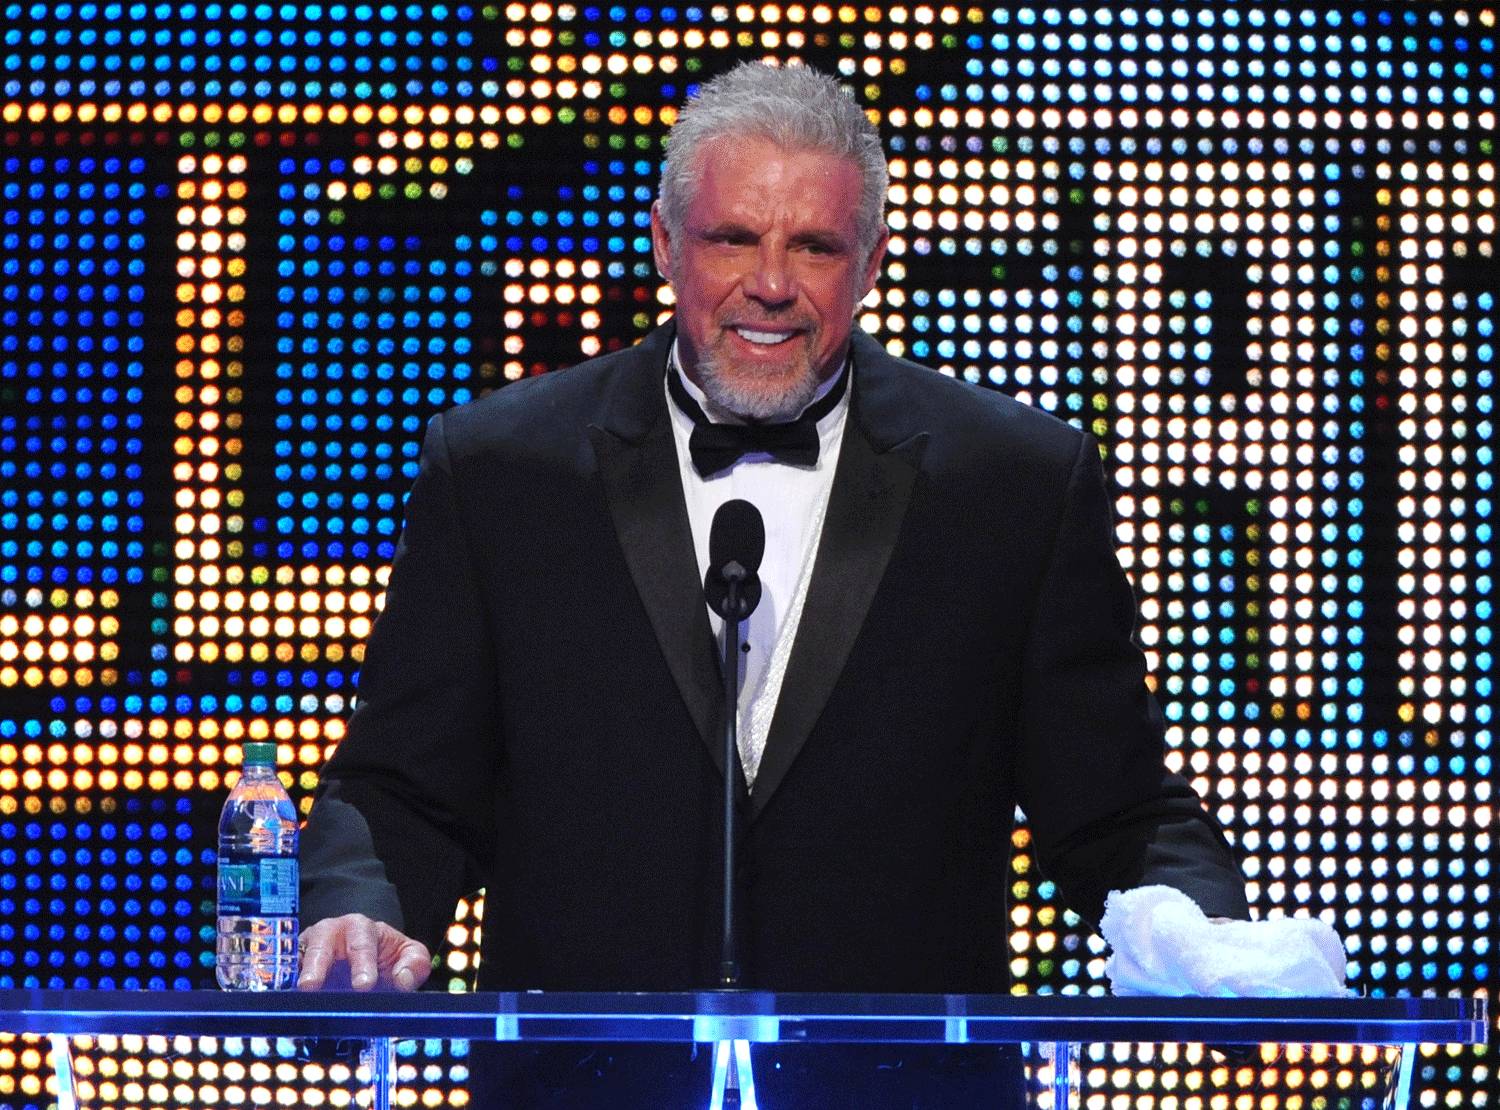 Ultimate Warrior was one of the WWE's biggest stars